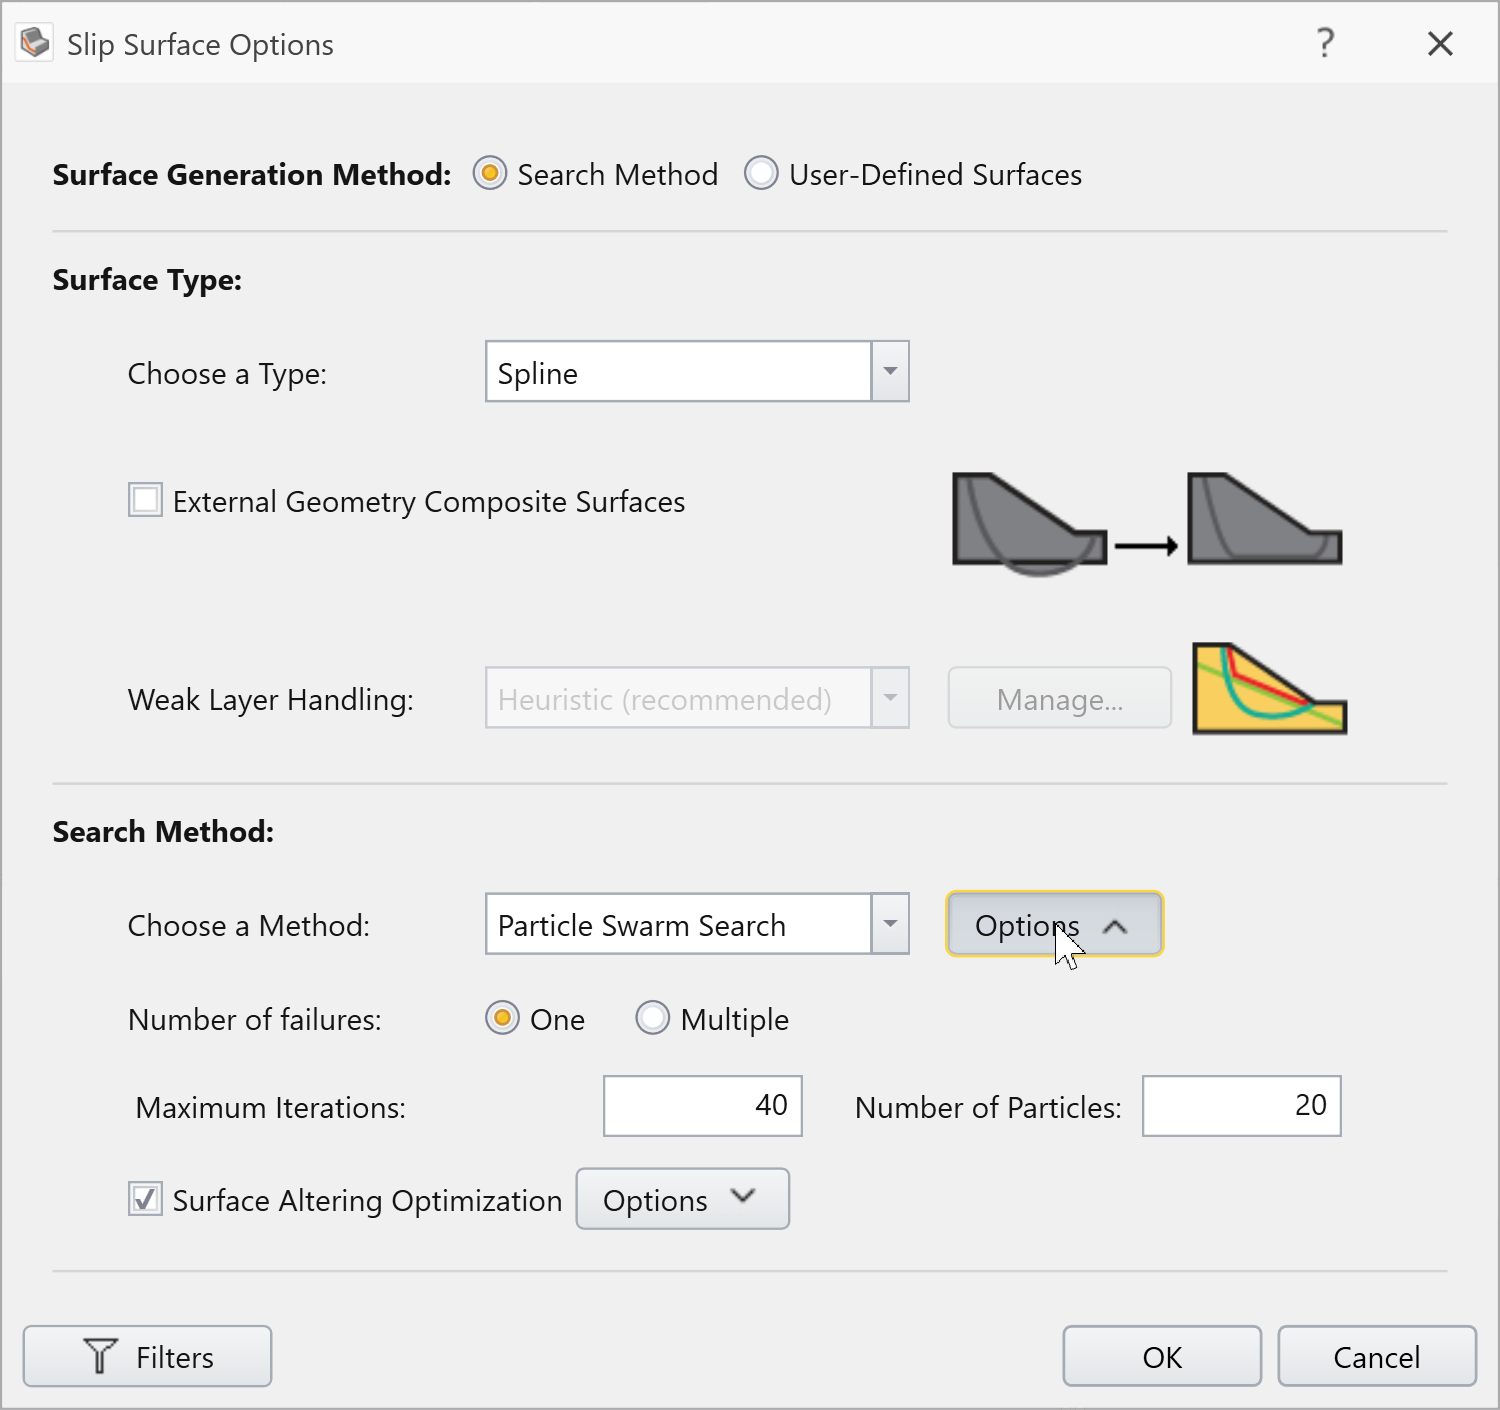 Slip Surface Options dialog with default settings